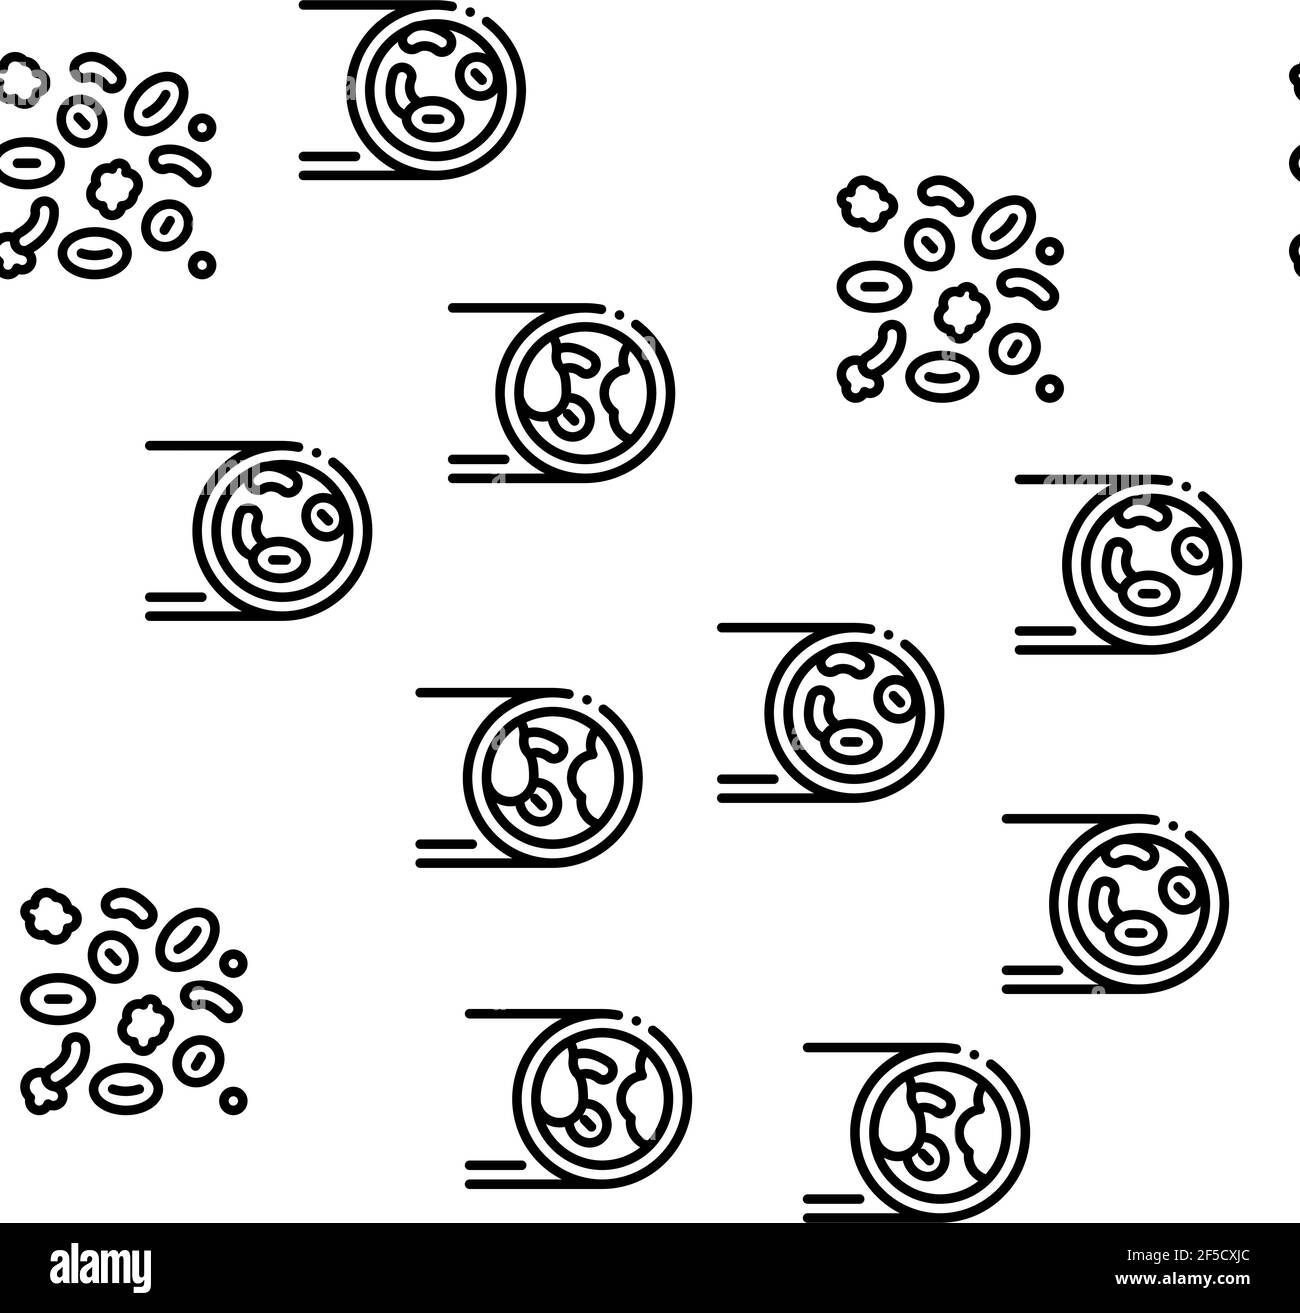 Atherosclerosis Vessel Seamless Pattern Vector Stock Vector